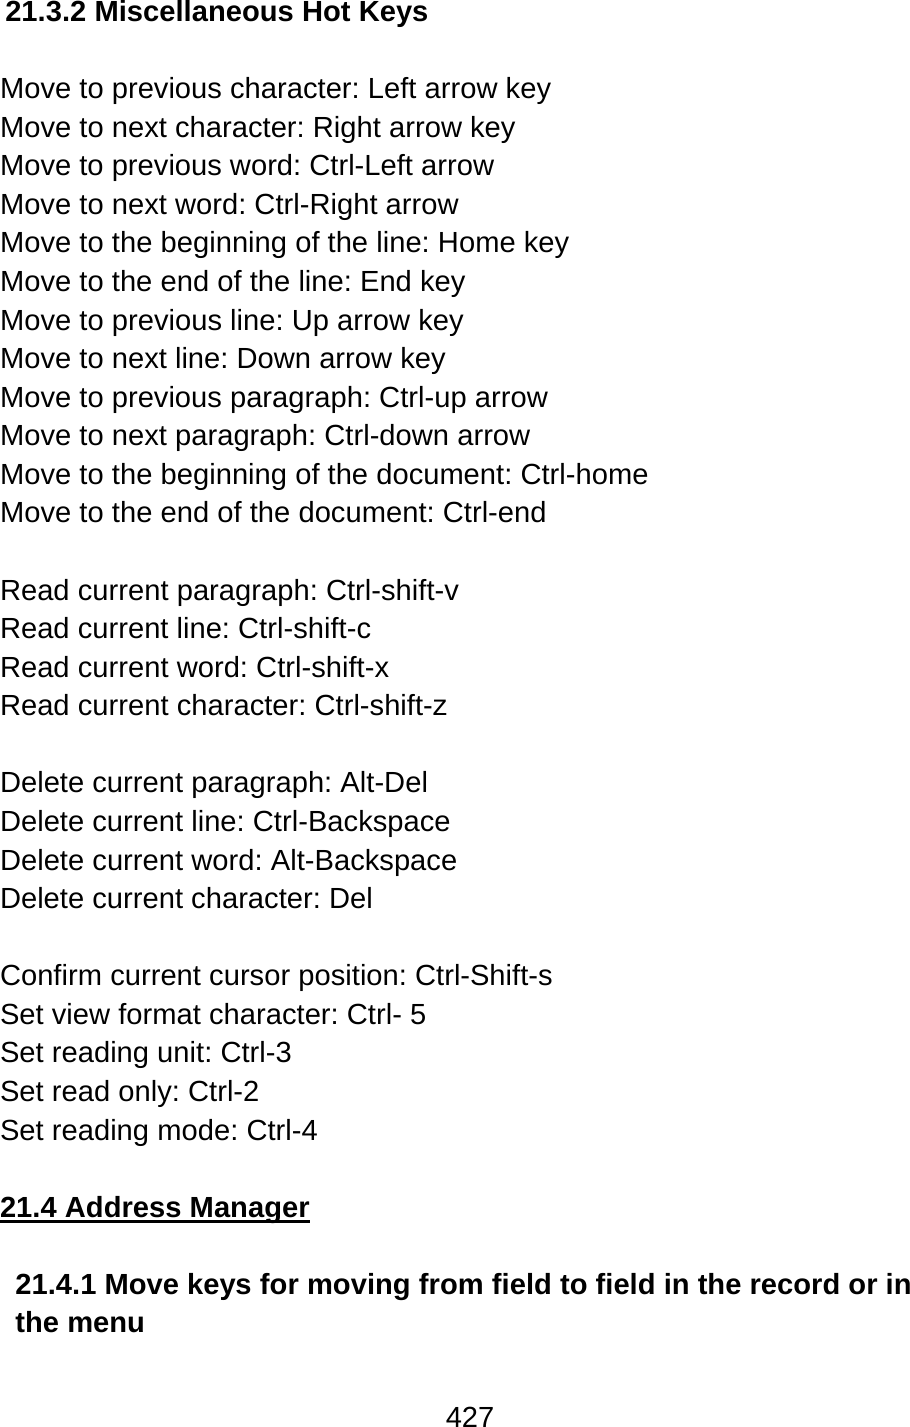 427  21.3.2 Miscellaneous Hot Keys  Move to previous character: Left arrow key Move to next character: Right arrow key Move to previous word: Ctrl-Left arrow Move to next word: Ctrl-Right arrow Move to the beginning of the line: Home key Move to the end of the line: End key Move to previous line: Up arrow key Move to next line: Down arrow key Move to previous paragraph: Ctrl-up arrow Move to next paragraph: Ctrl-down arrow Move to the beginning of the document: Ctrl-home Move to the end of the document: Ctrl-end  Read current paragraph: Ctrl-shift-v Read current line: Ctrl-shift-c Read current word: Ctrl-shift-x Read current character: Ctrl-shift-z  Delete current paragraph: Alt-Del Delete current line: Ctrl-Backspace Delete current word: Alt-Backspace Delete current character: Del  Confirm current cursor position: Ctrl-Shift-s Set view format character: Ctrl- 5 Set reading unit: Ctrl-3   Set read only: Ctrl-2 Set reading mode: Ctrl-4  21.4 Address Manager  21.4.1 Move keys for moving from field to field in the record or in the menu   